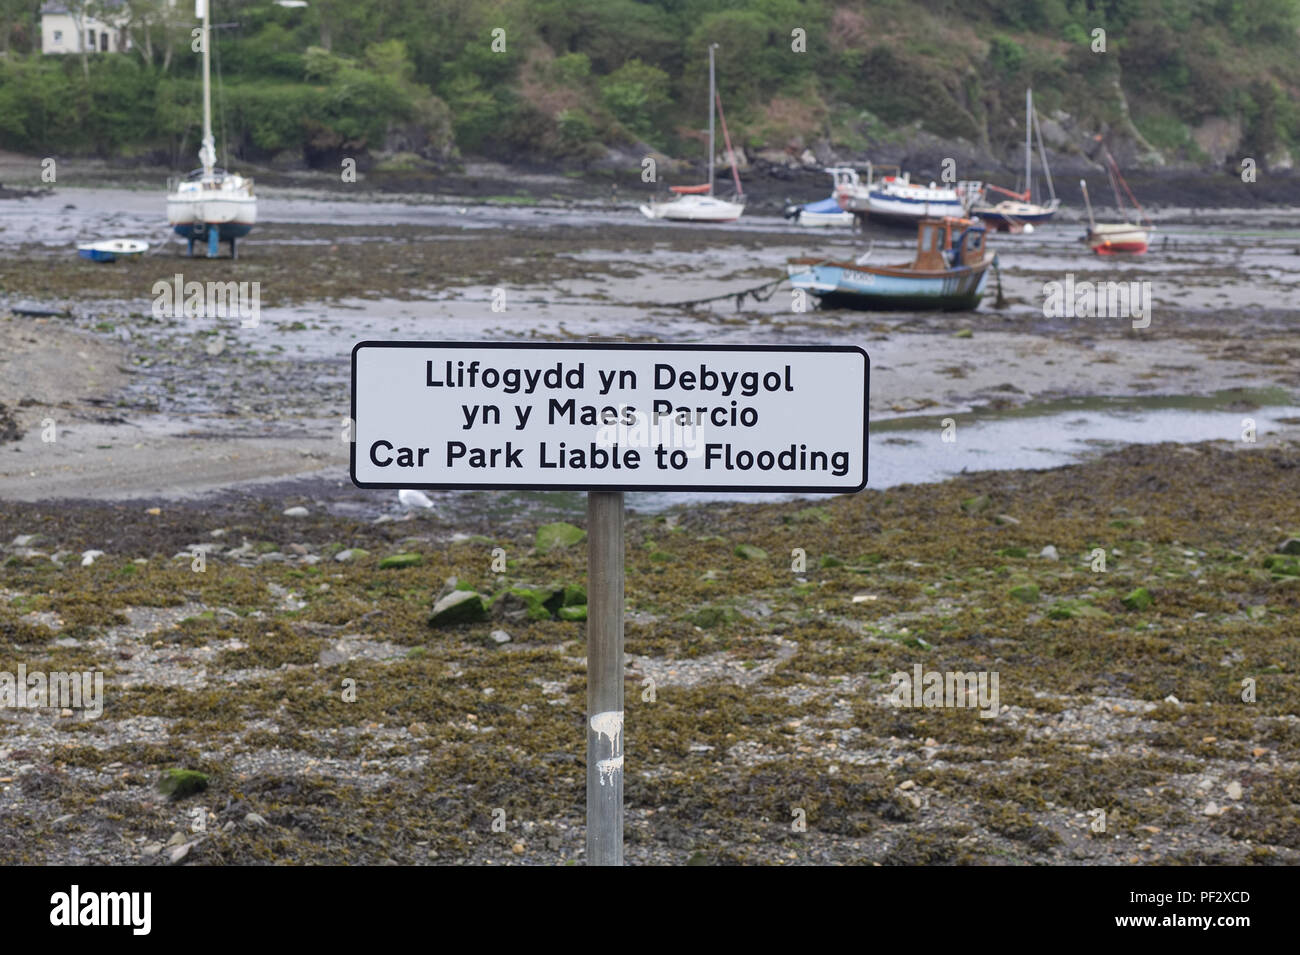 Boats in the harbor with a car park liable to flooding sign Stock Photo